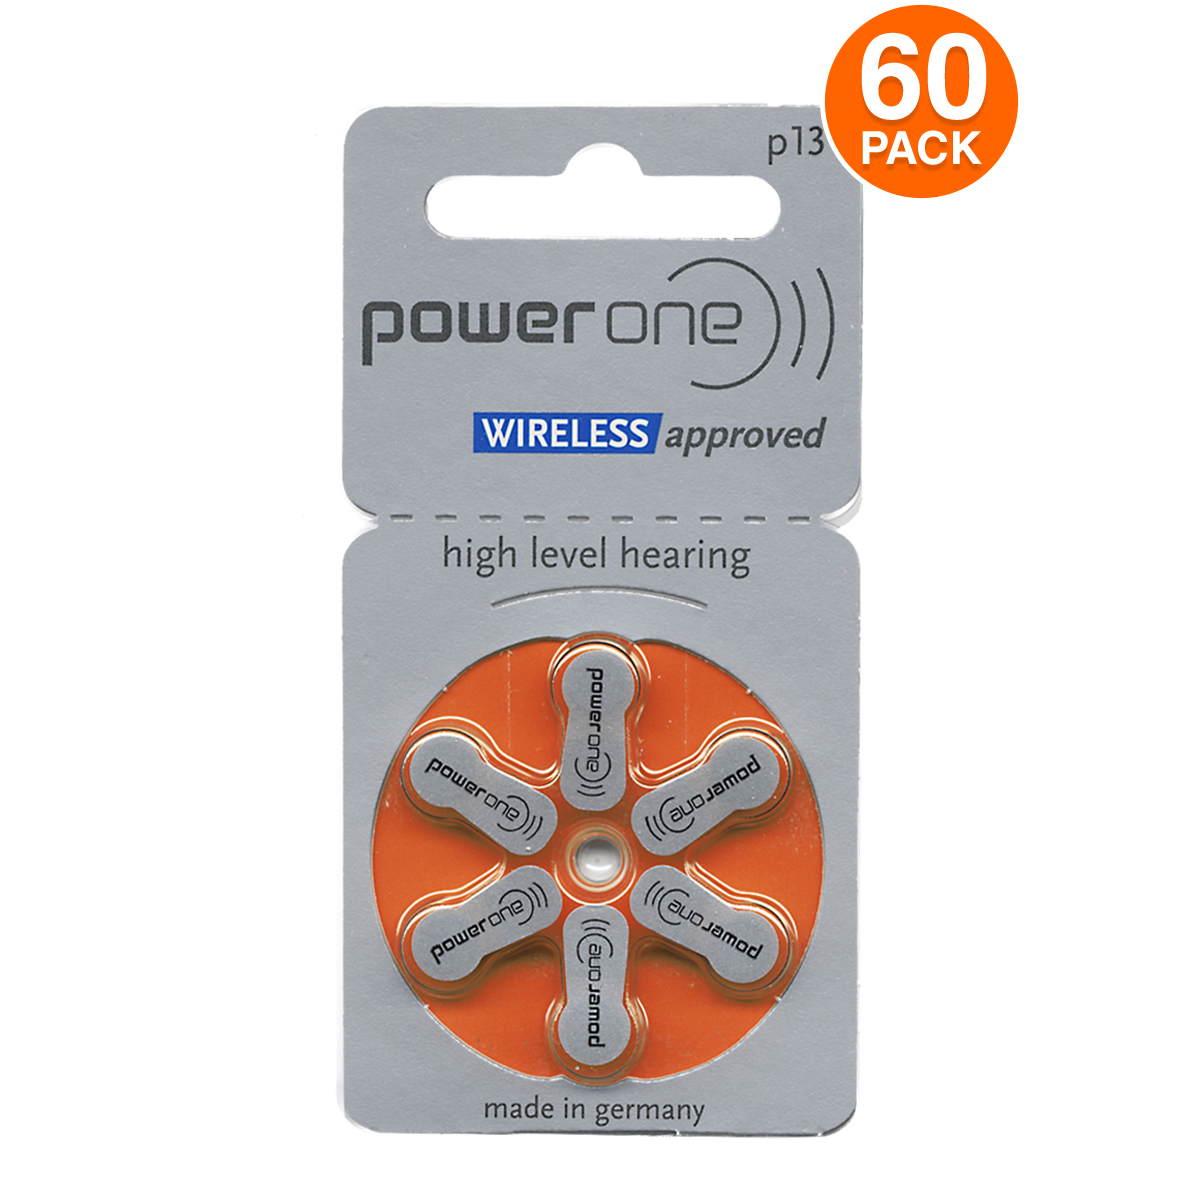 Power One Size 13 - Mercury Free - Pr48 P13 Hearing Aid Batteries (60 Pack)